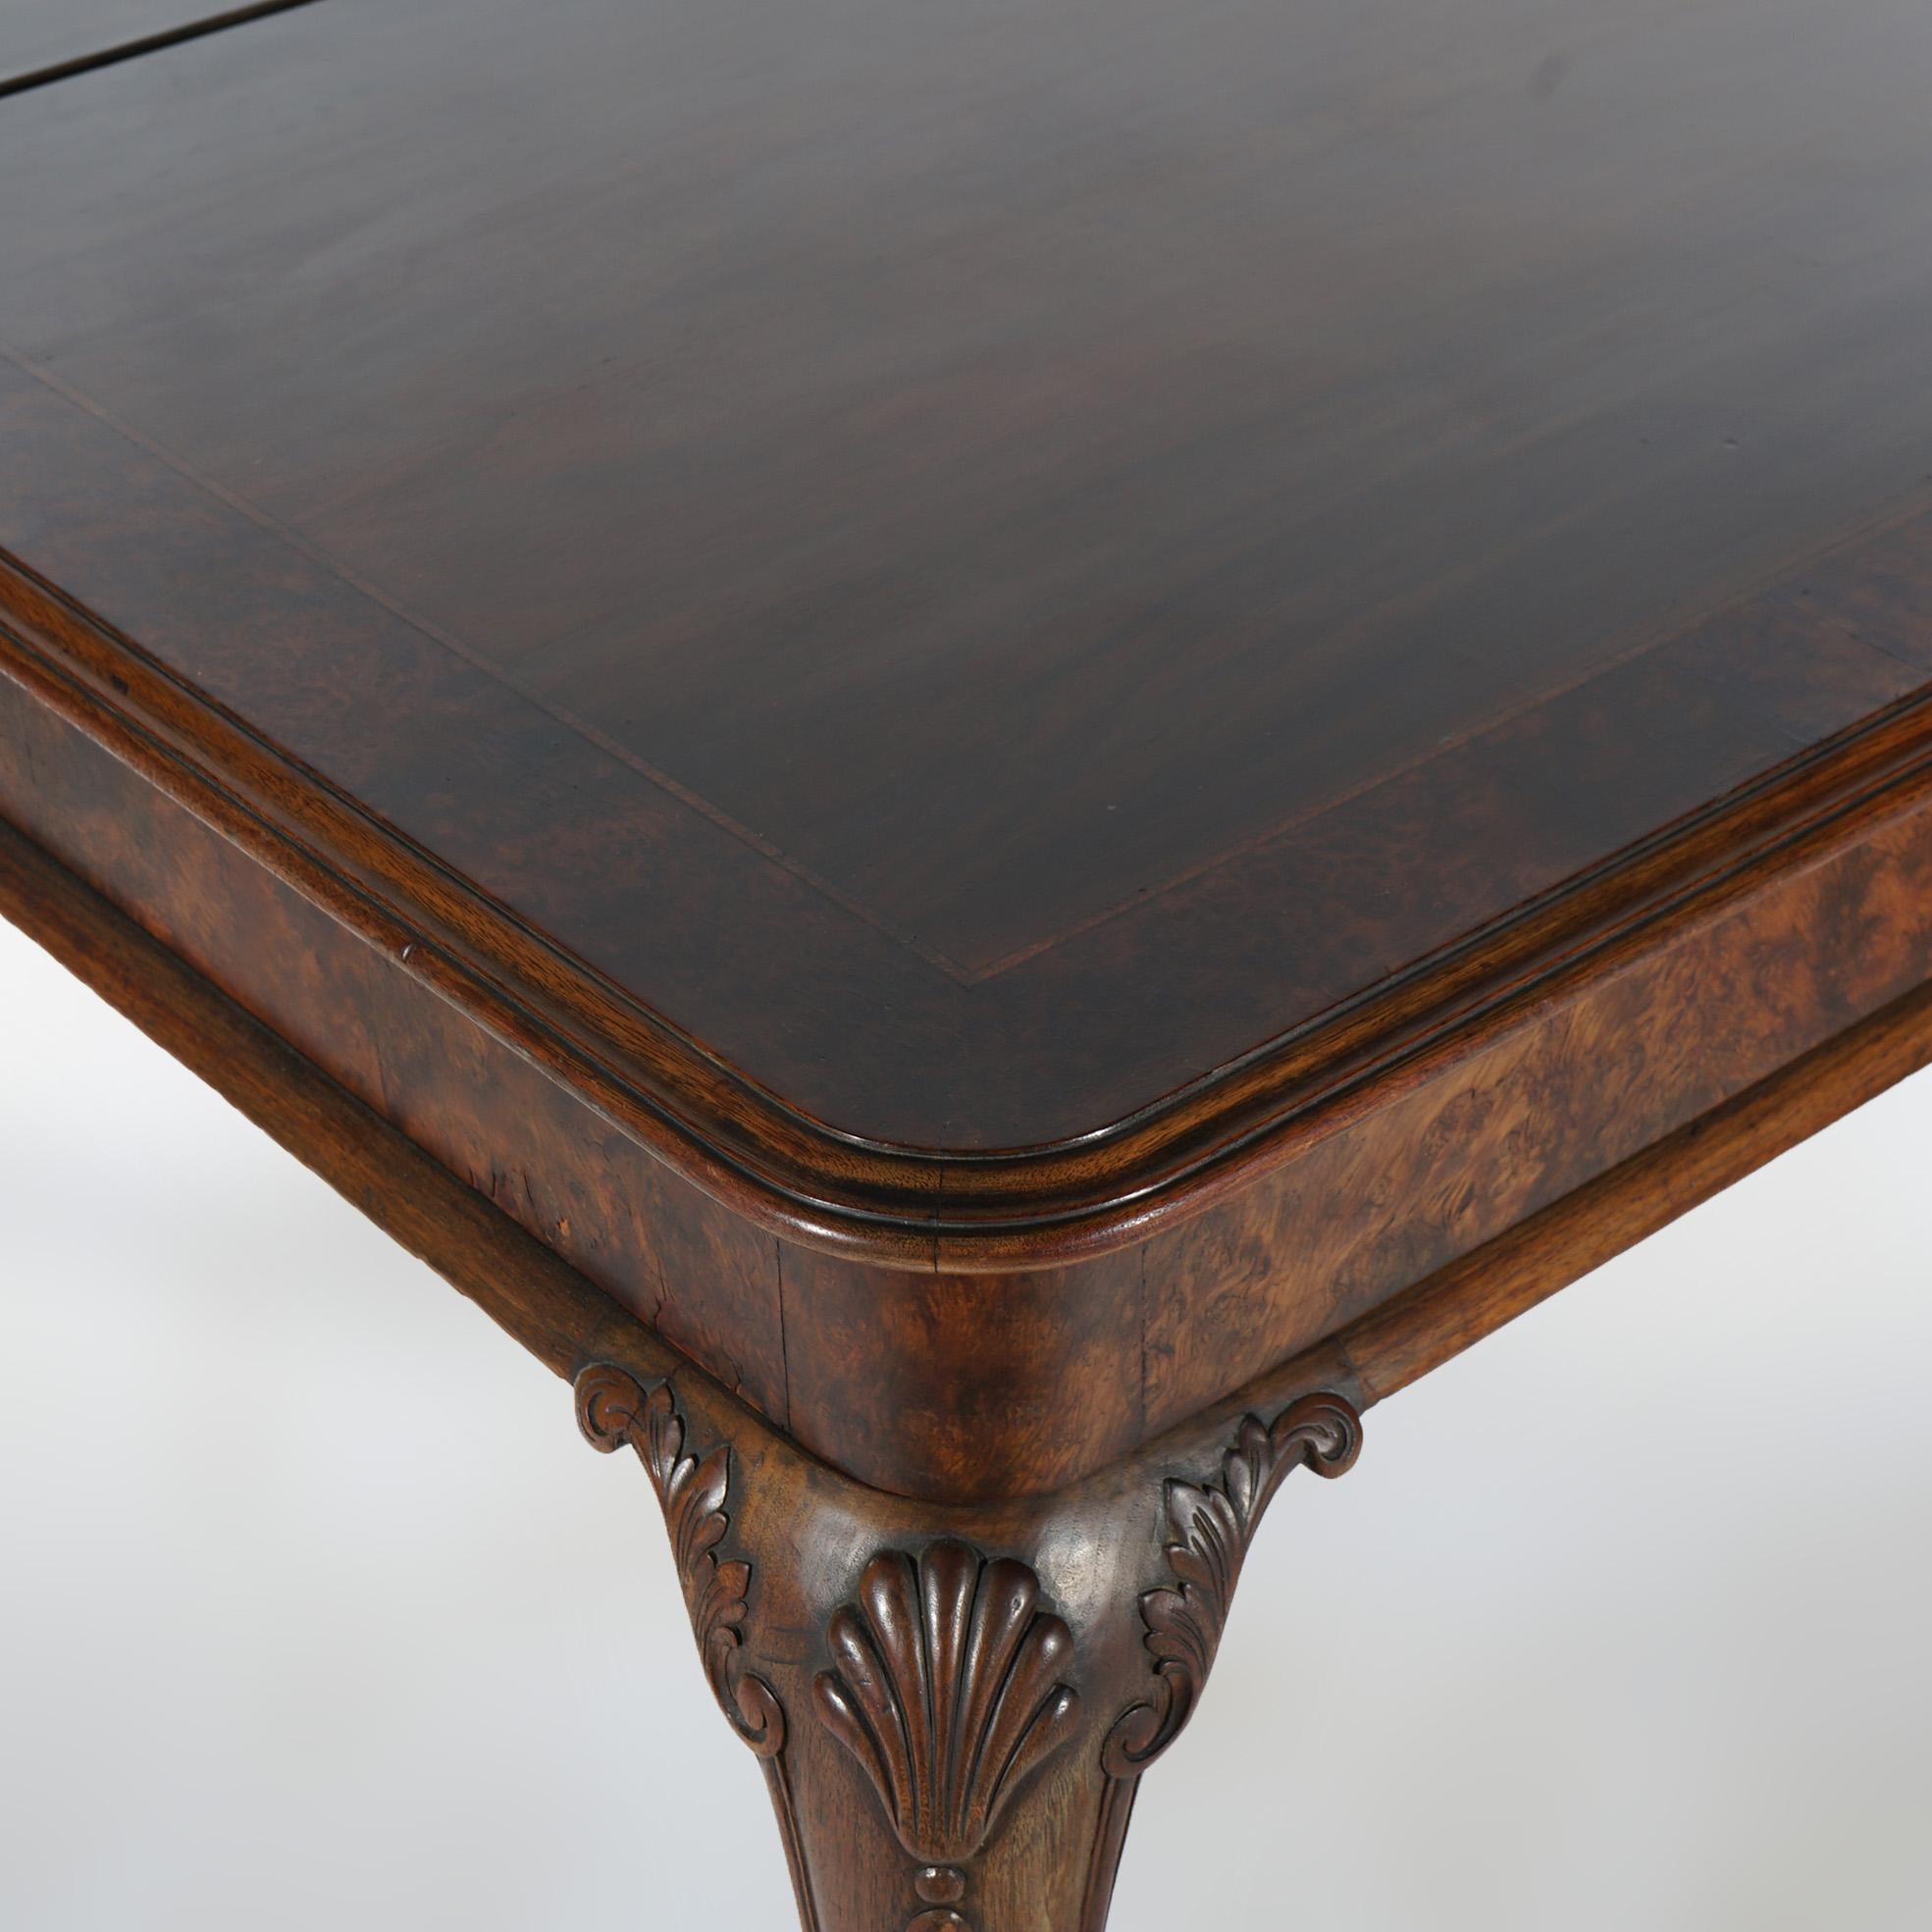 Antique Queen Anne Style Mahogany Banded Inlaid Dining Table & Two Leaves 1930 For Sale 2